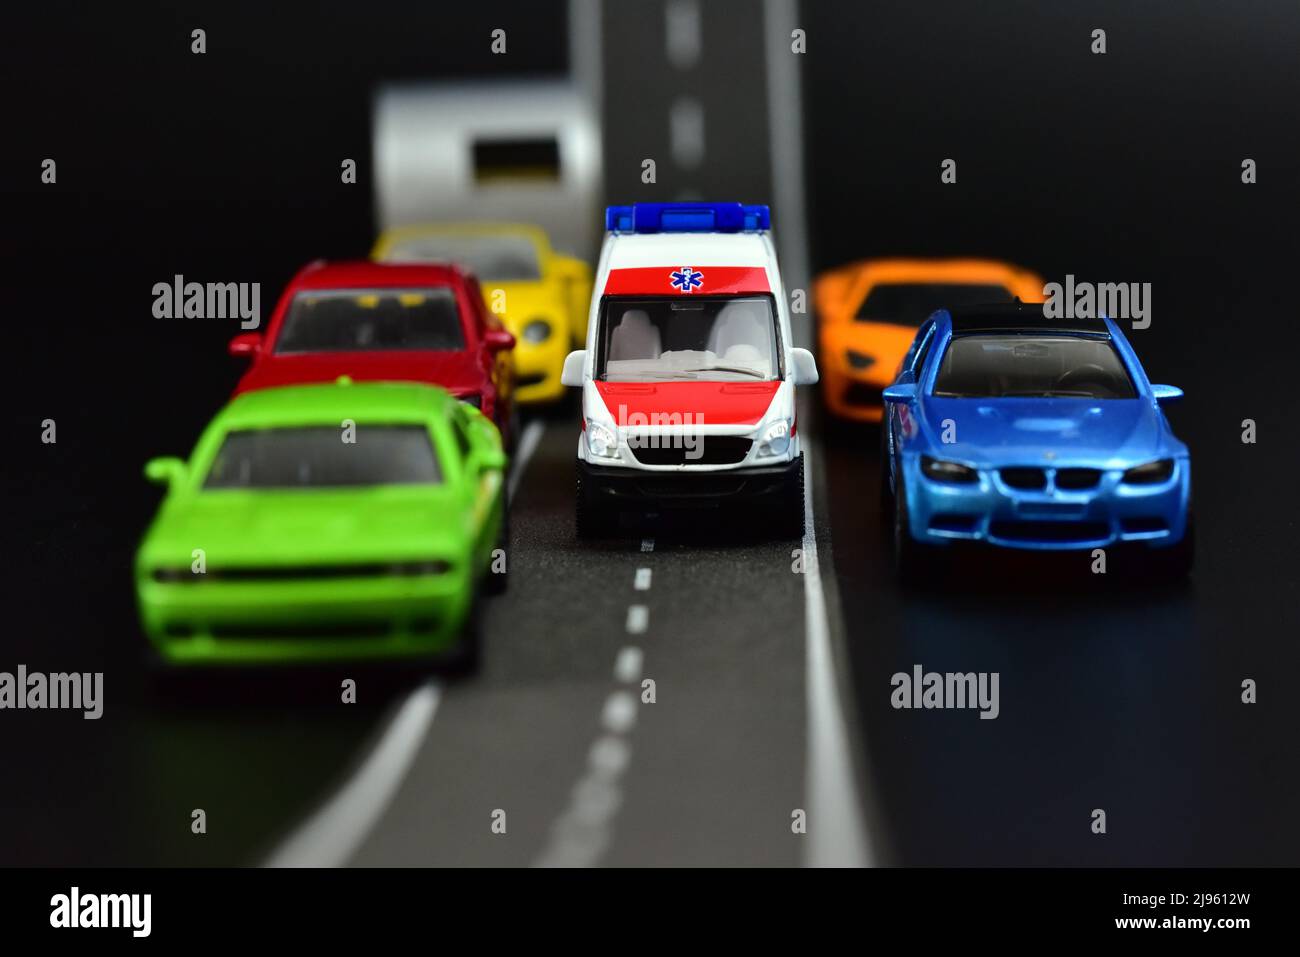 emergency rescue lane with toy car Stock Photo